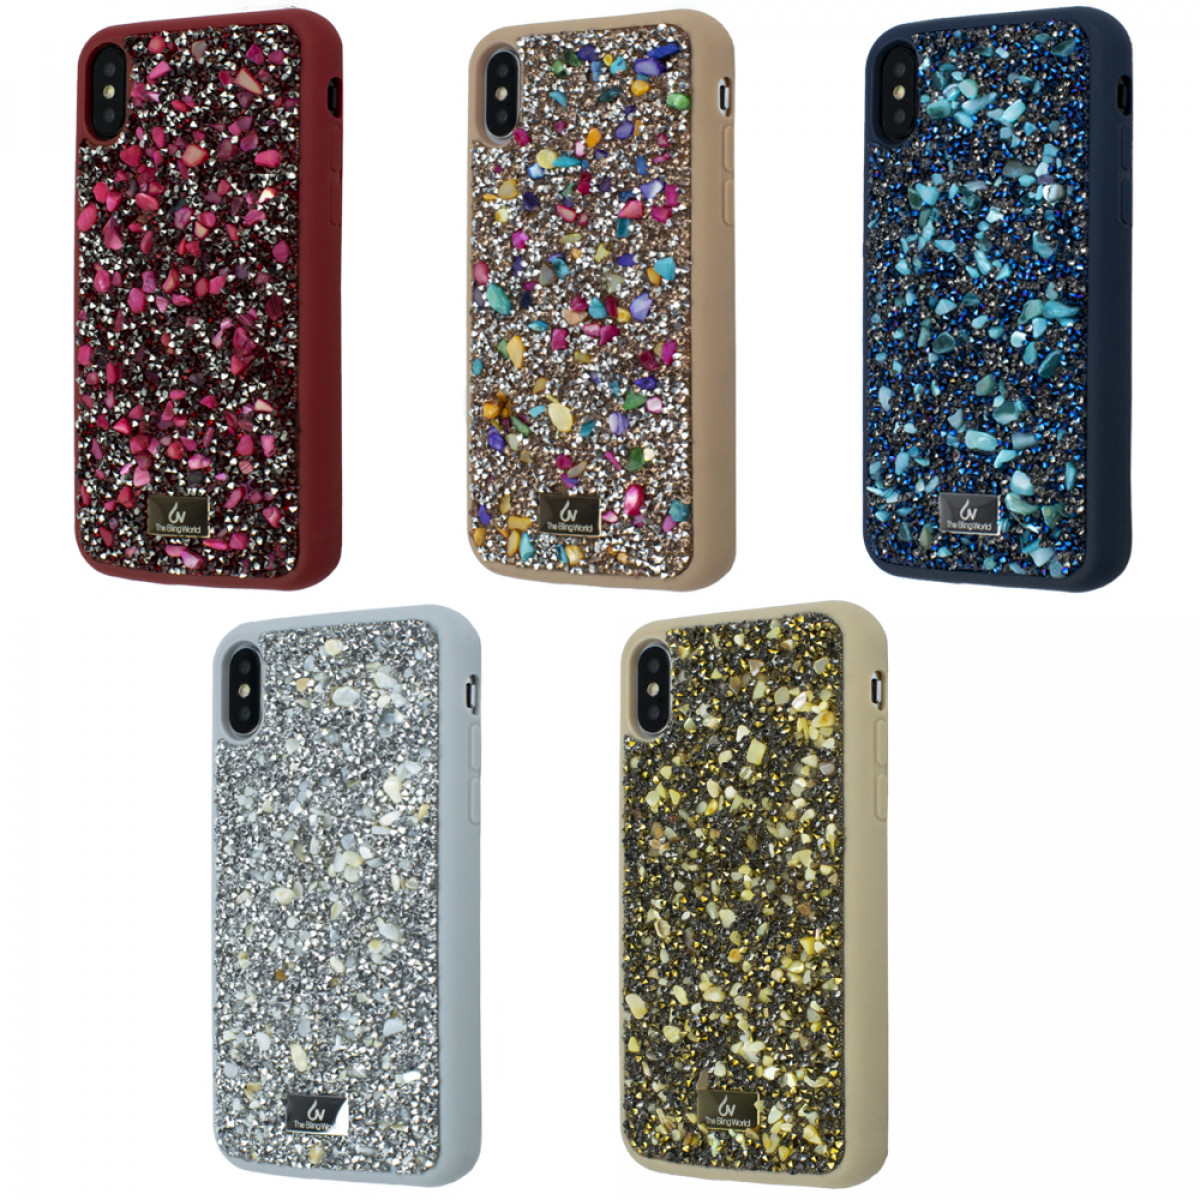 Bling STONE Case iPhone X/XS